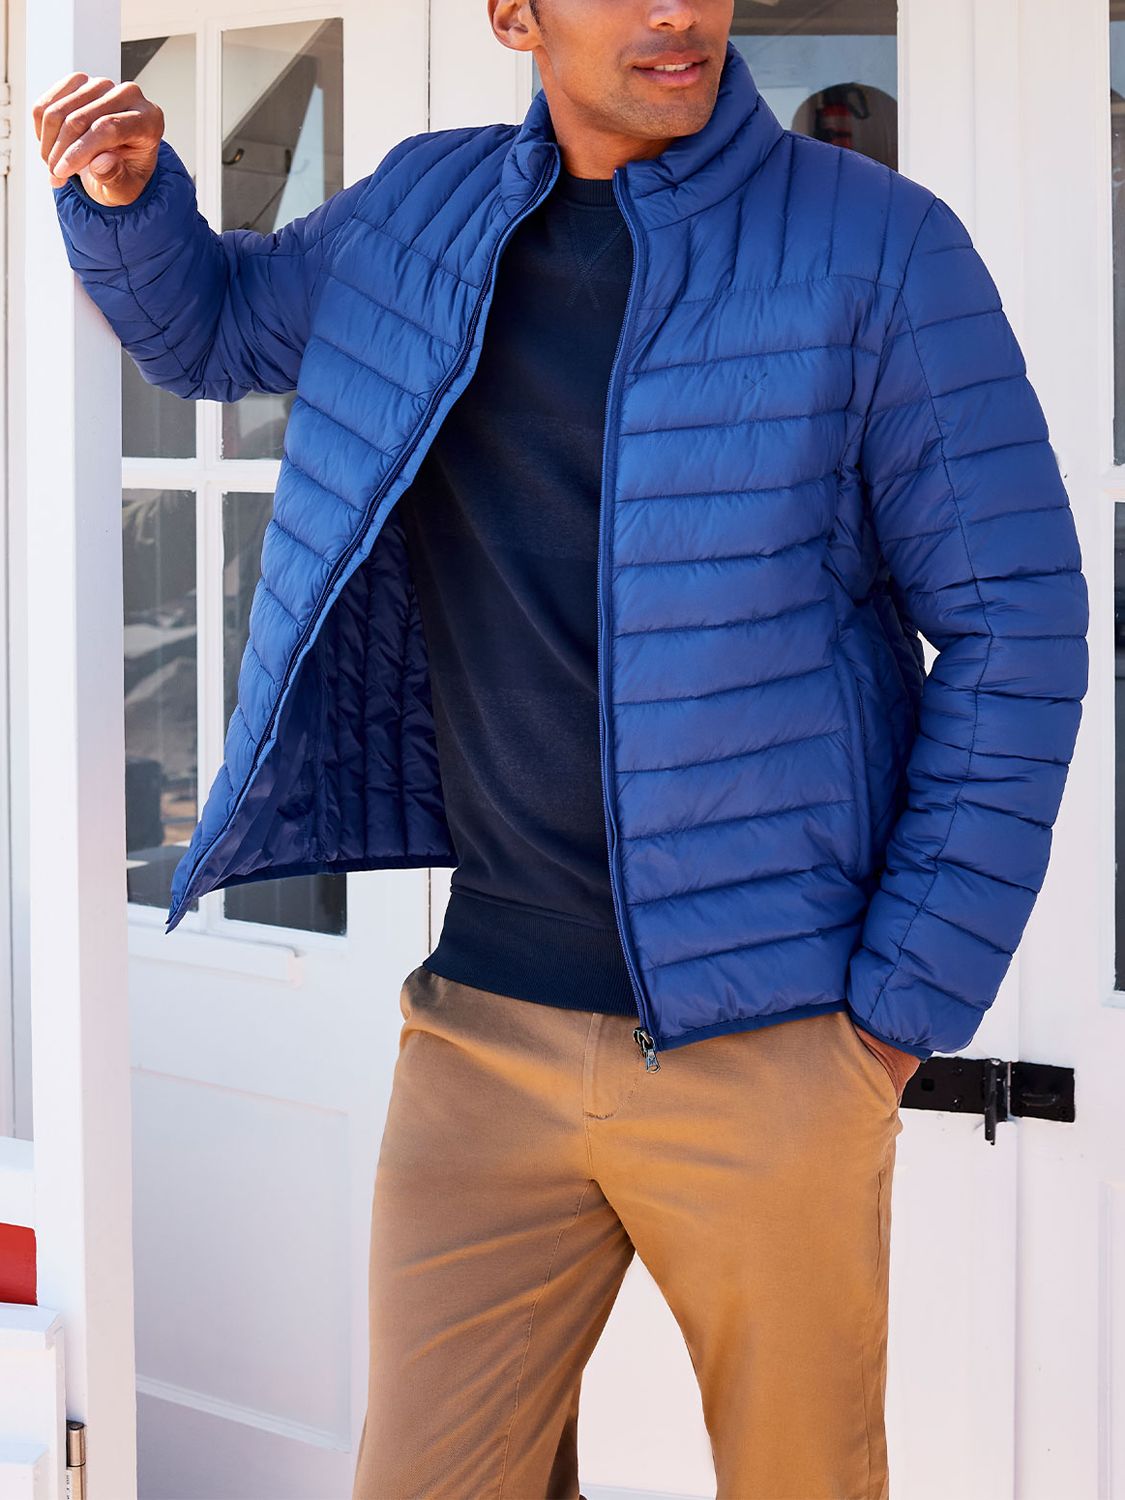 Crew Clothing Lowther Lightweight Jacket, Bright Blue at John Lewis ...